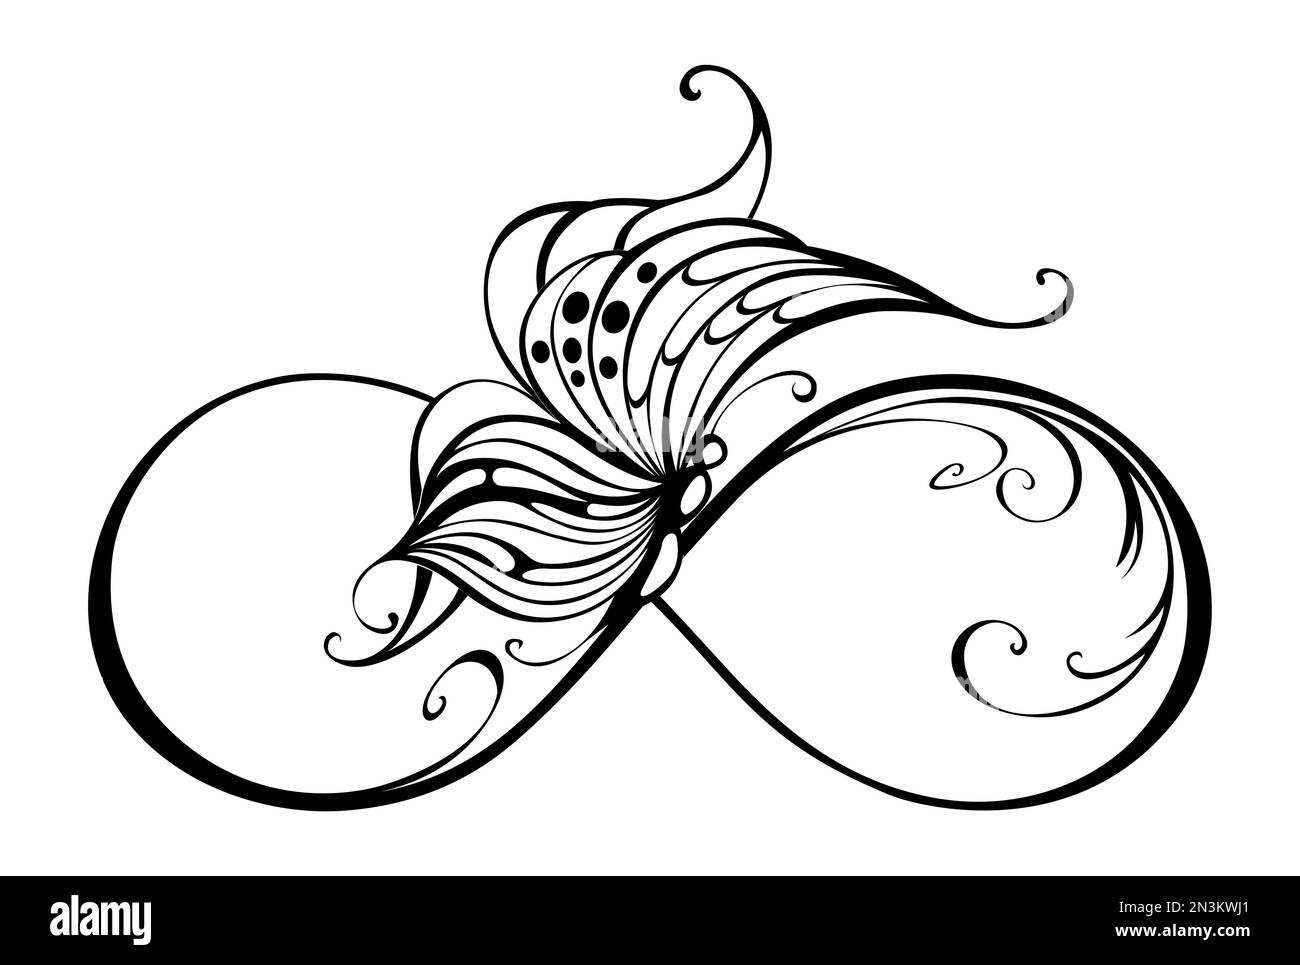 Black infinity symbol with a seated, artistically drawn moth on white background. Tattoo style. Contour butterfly. Stock Vector